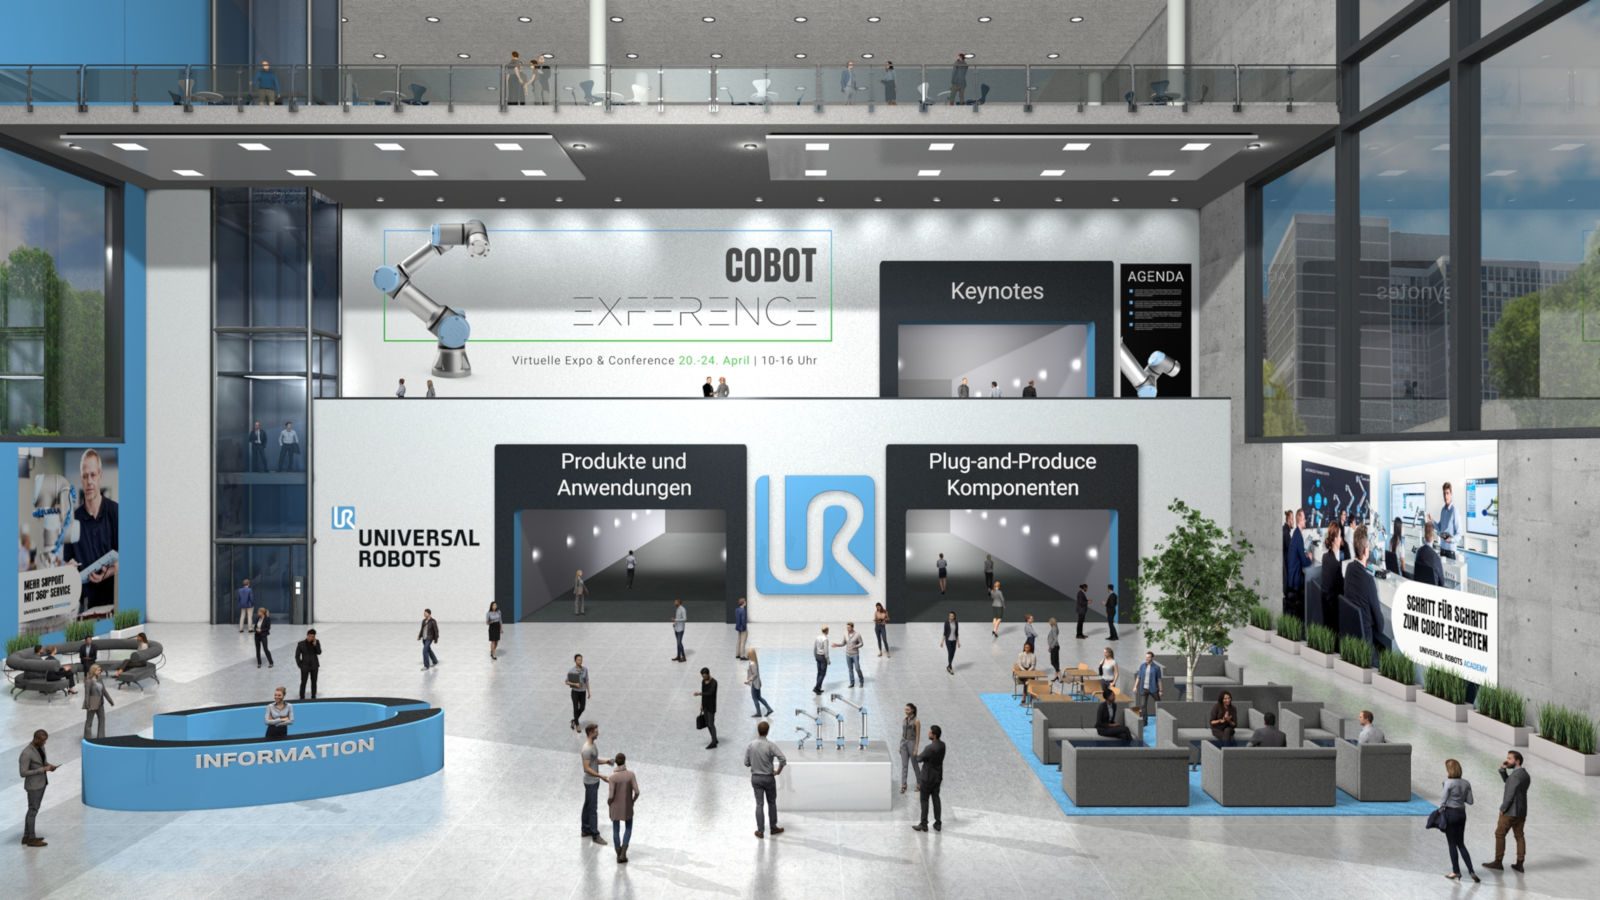 COBOT EXFERENCE 2020 7